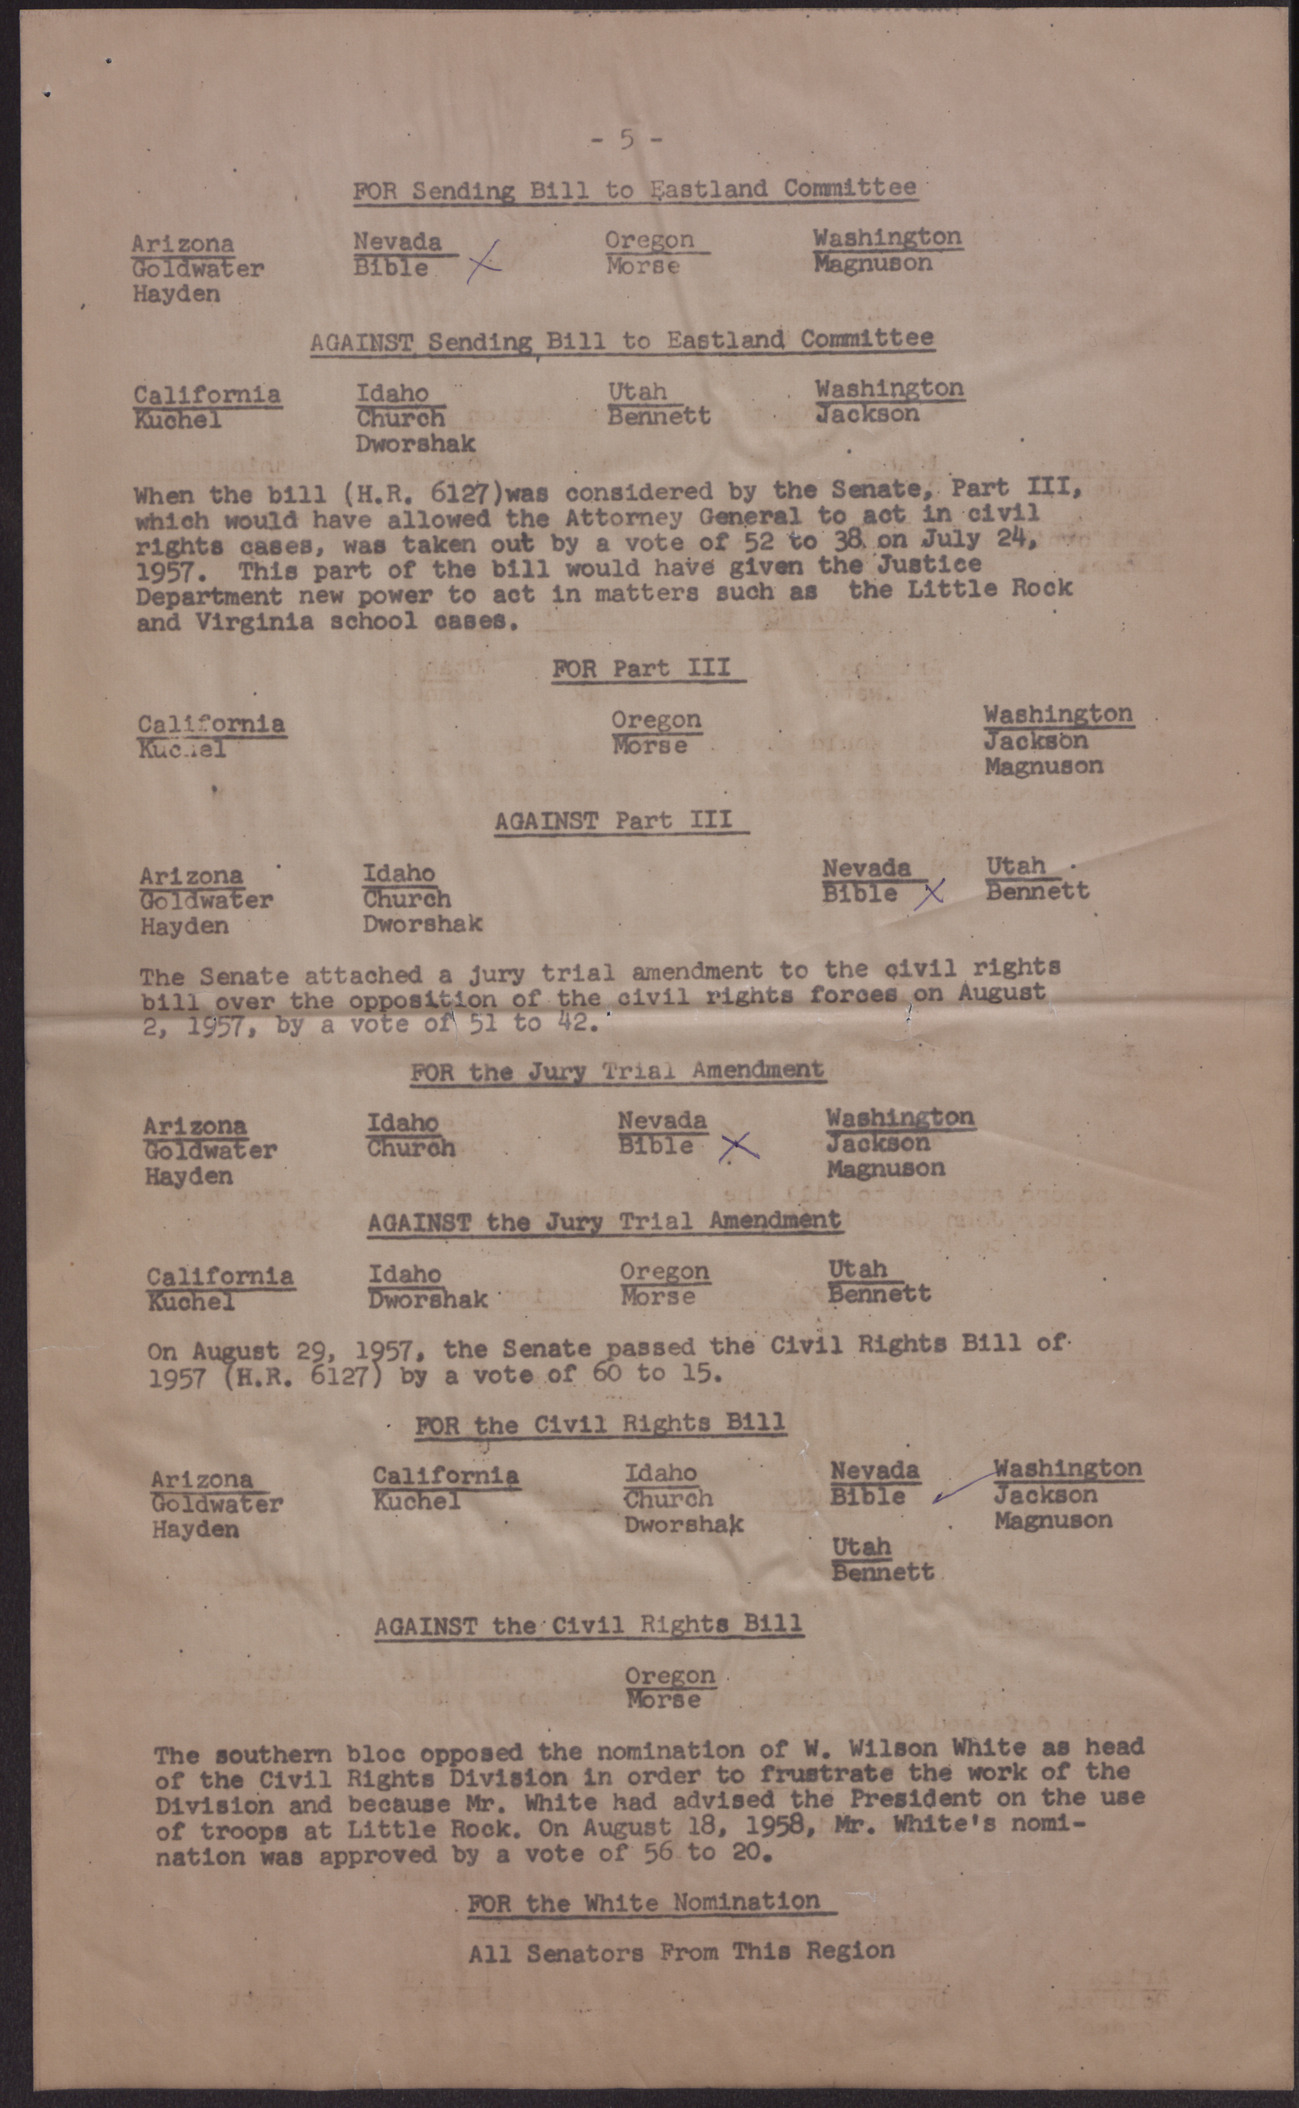 Summary of Voting Records of Senators from States in NAACP Region I (10 pages), August 1960, page 5